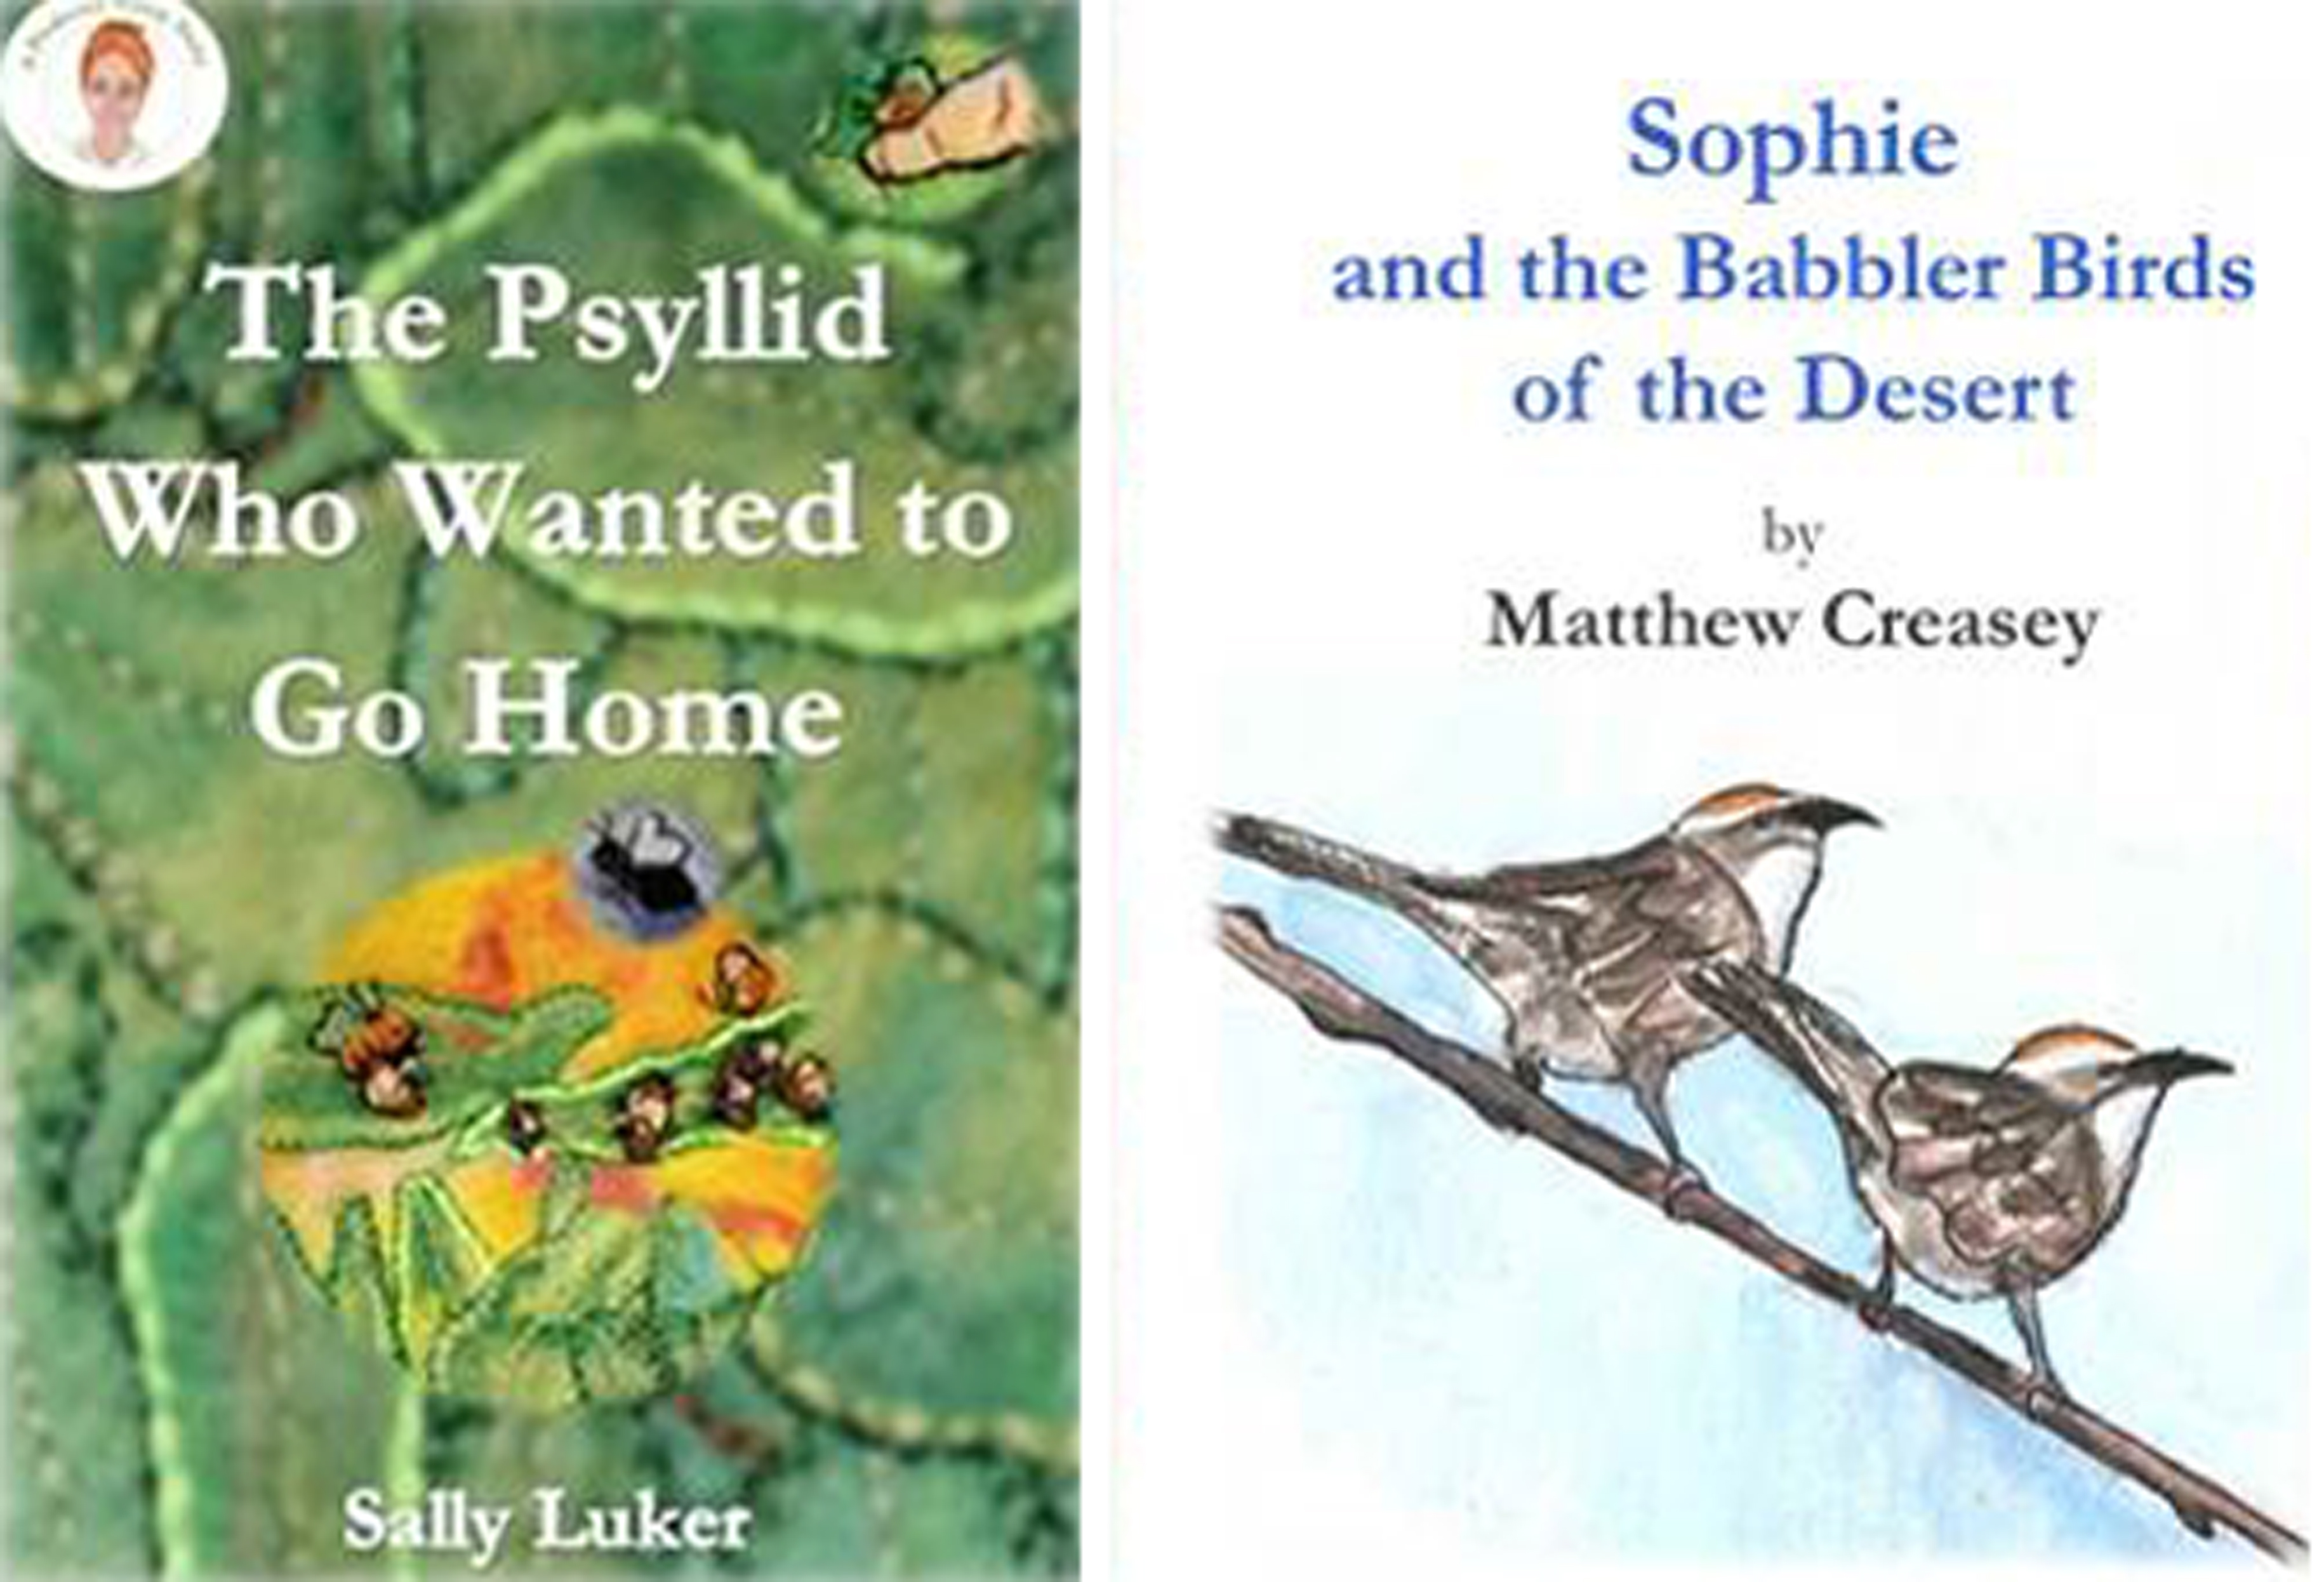 The Psyllid Who Wanted to Go Home and Sophie and the Babbler Birds of the Desert.